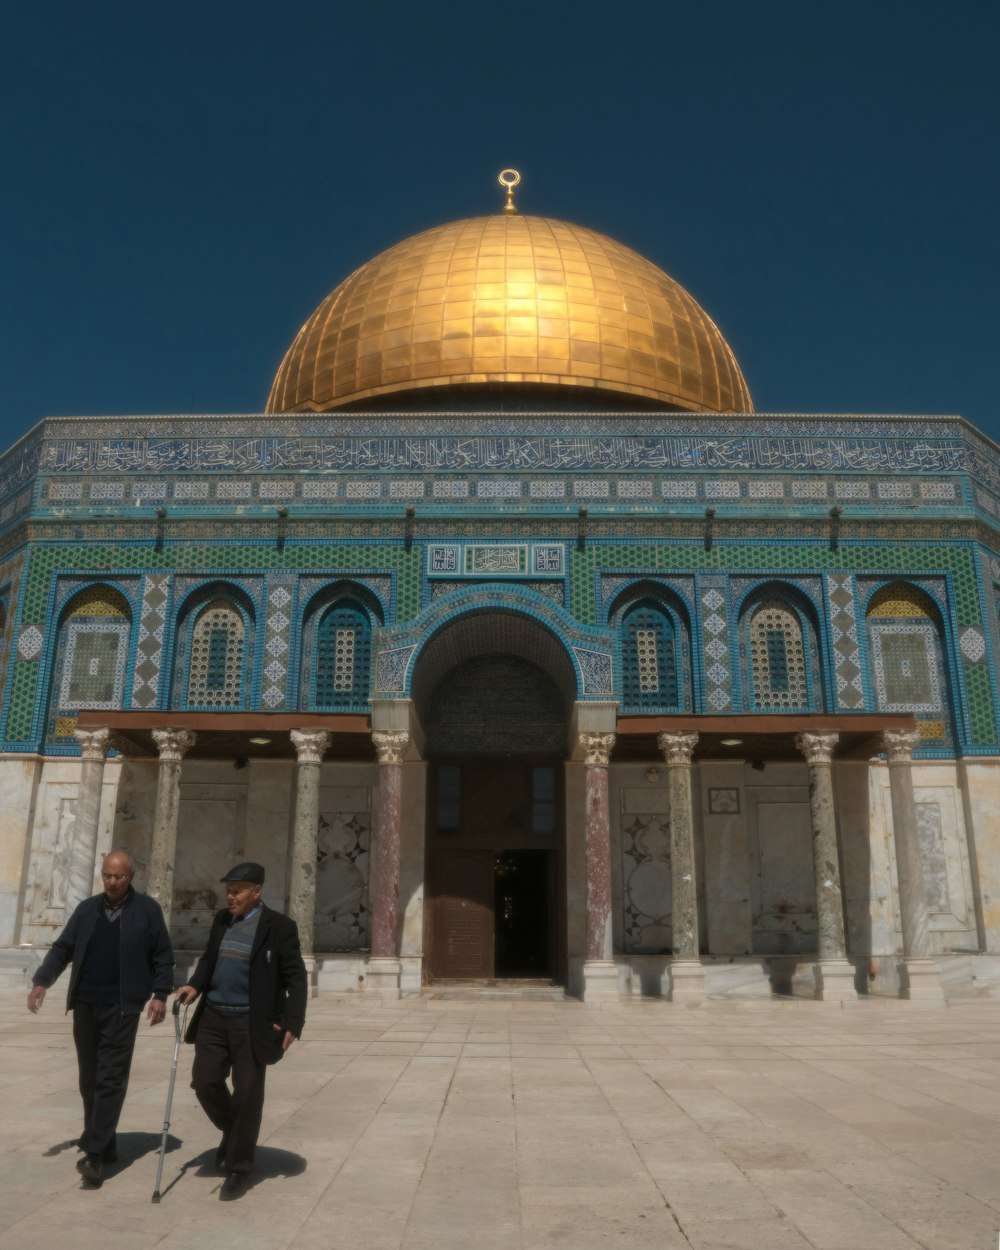 two men walking in front of a building with a golden dome